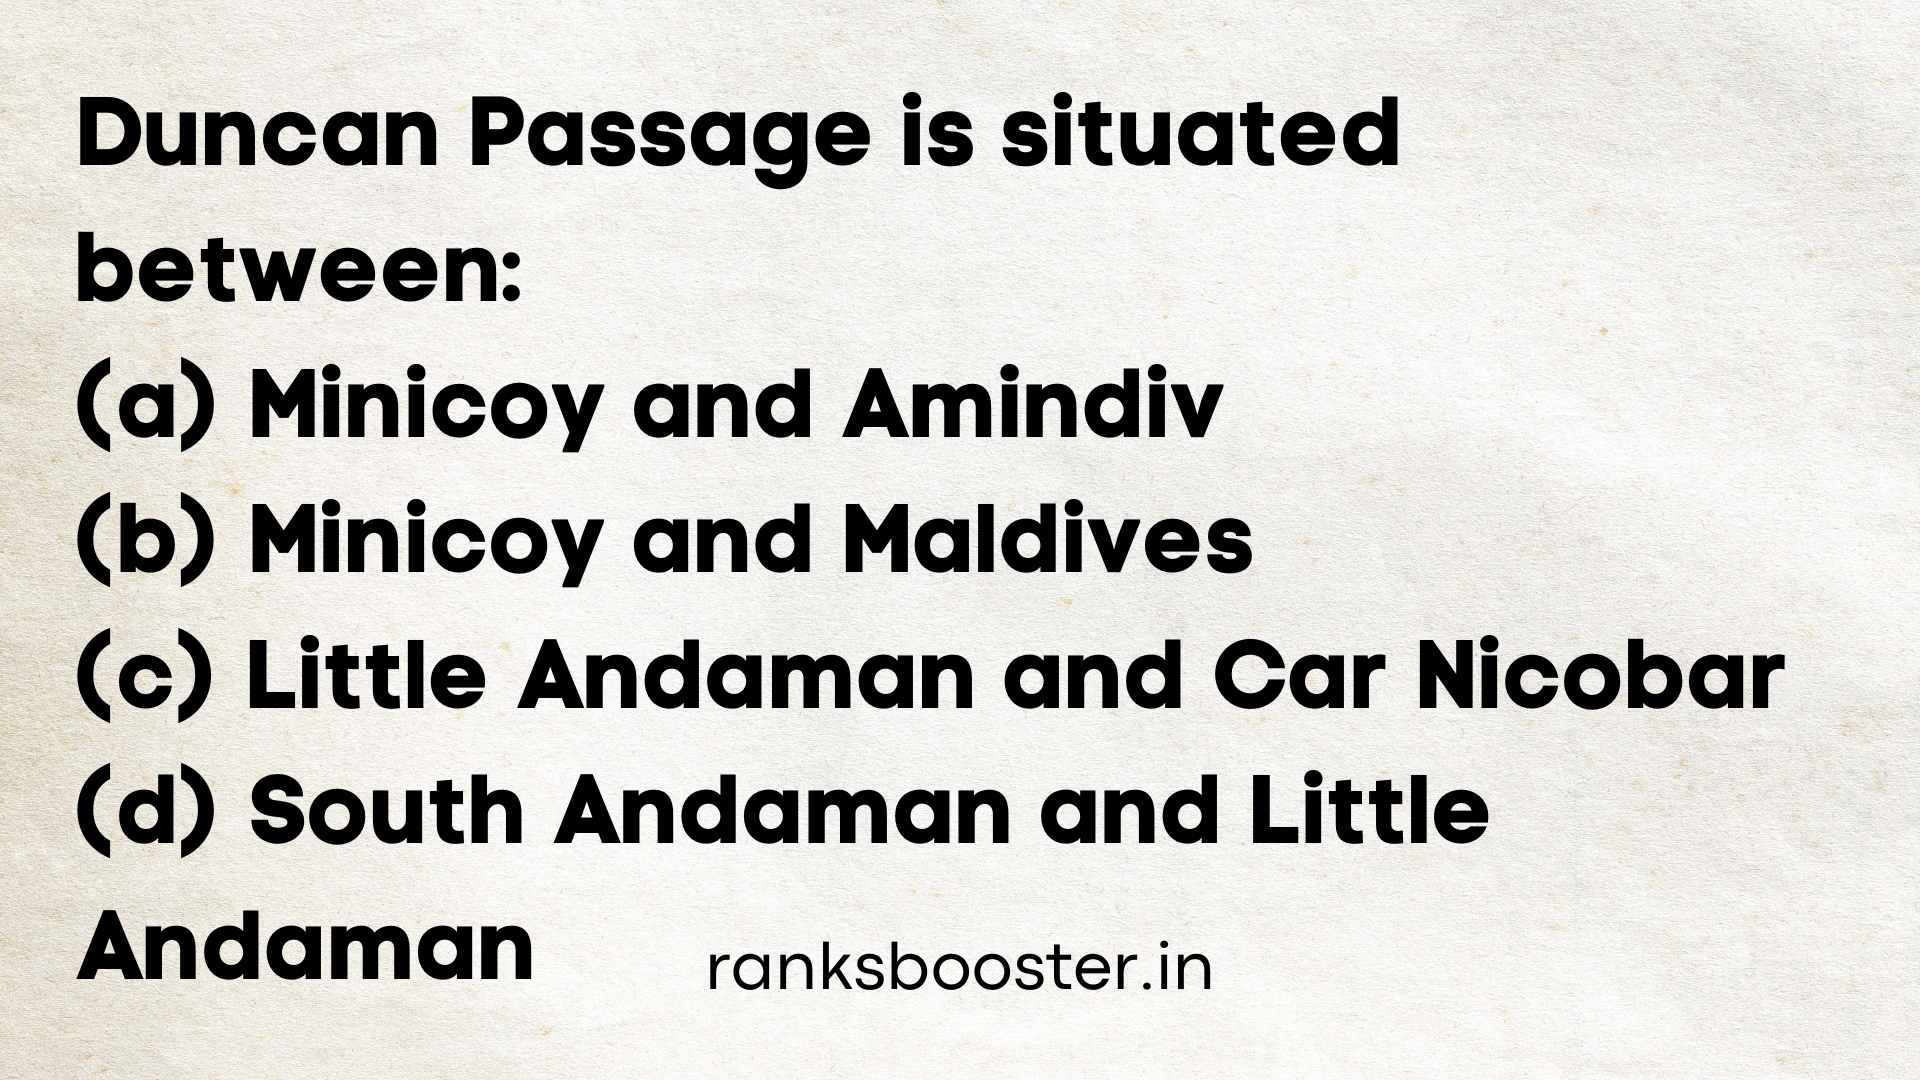 Duncan Passage is situated between: (A) Minicoy and Amindiv (B) Minicoy and Maldives (C) Little Andaman and Car Nicobar (D) South Andaman and Little Andaman